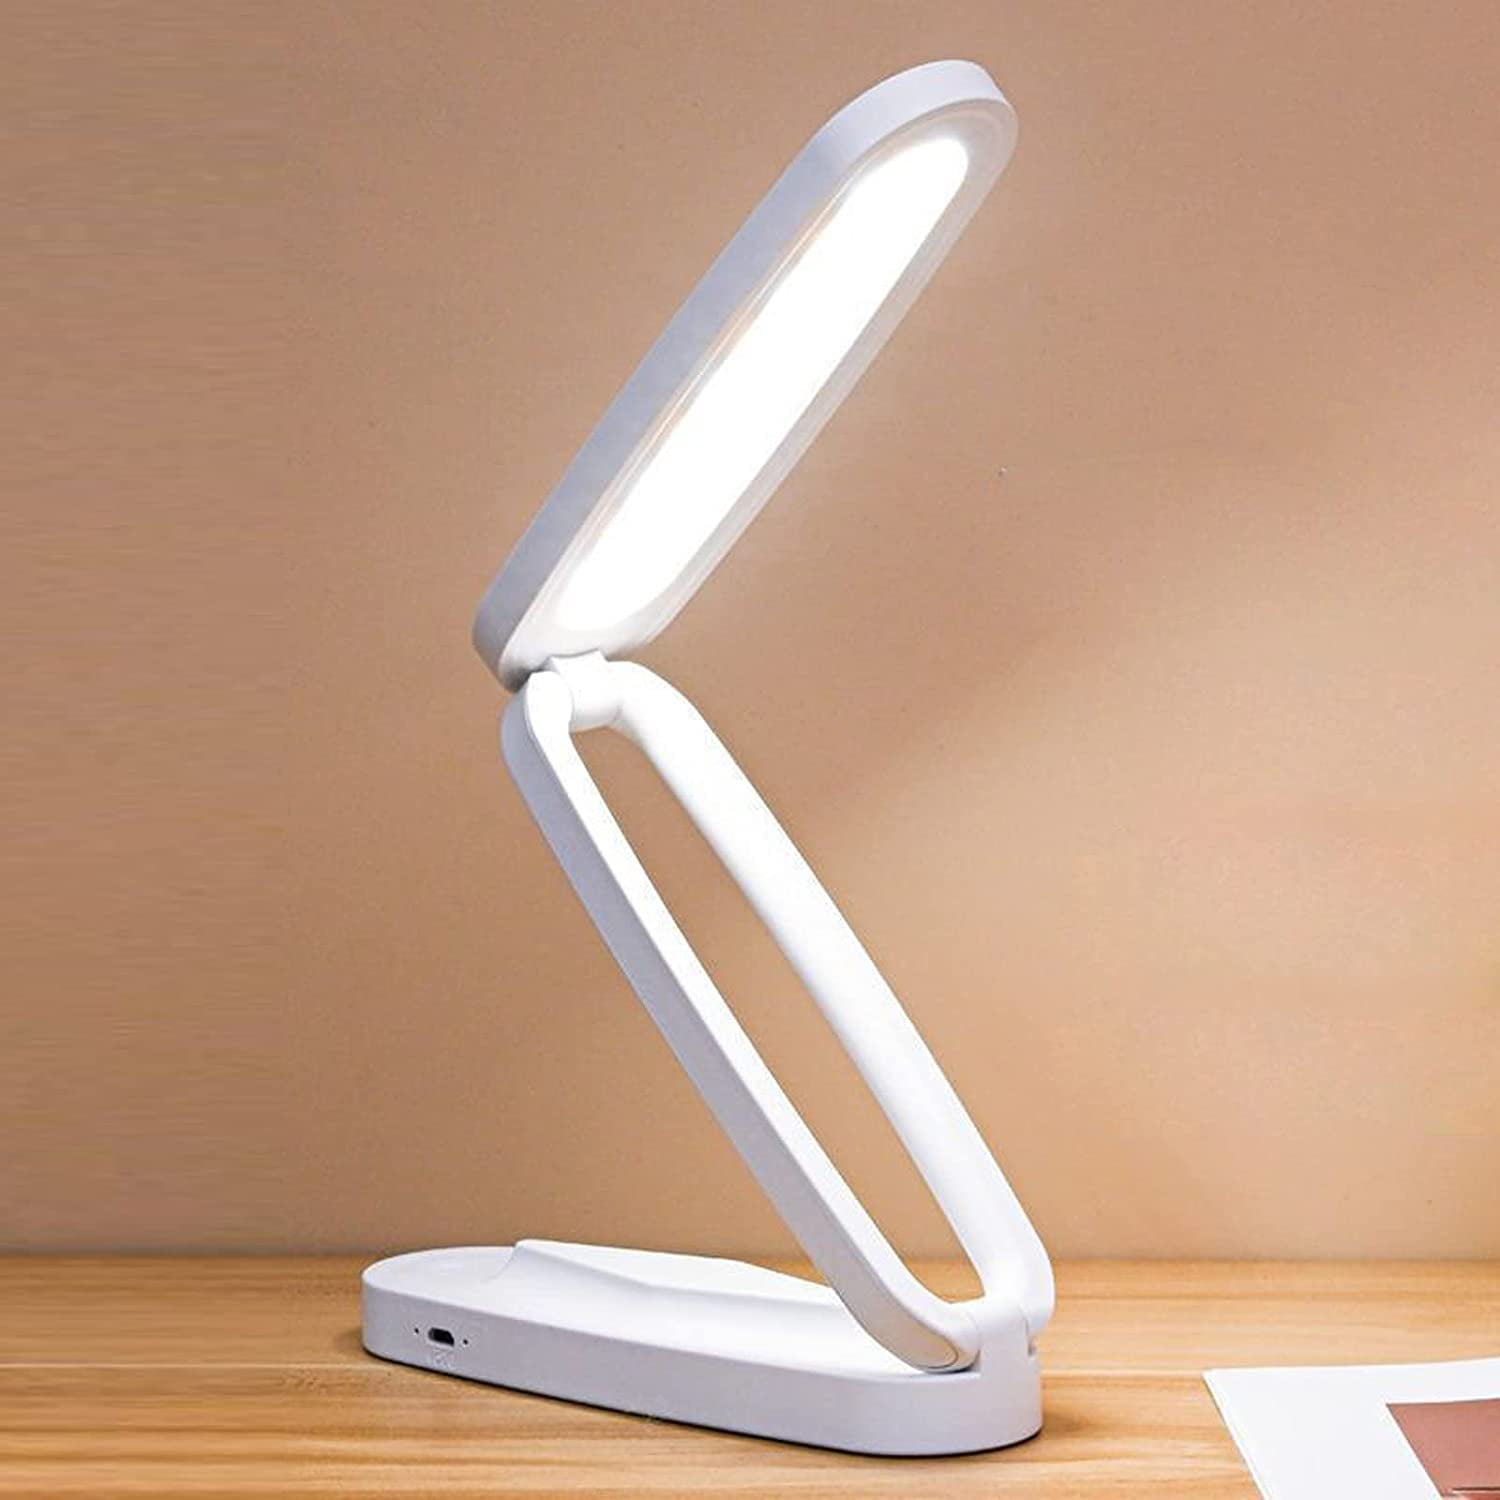 LED Table Lamp,Portable Eye-protected Flexible Gooseneck Small Desk Lights for Dorm Study Office Bedroom-USB or 3 AA Batteries Powered -Not Include